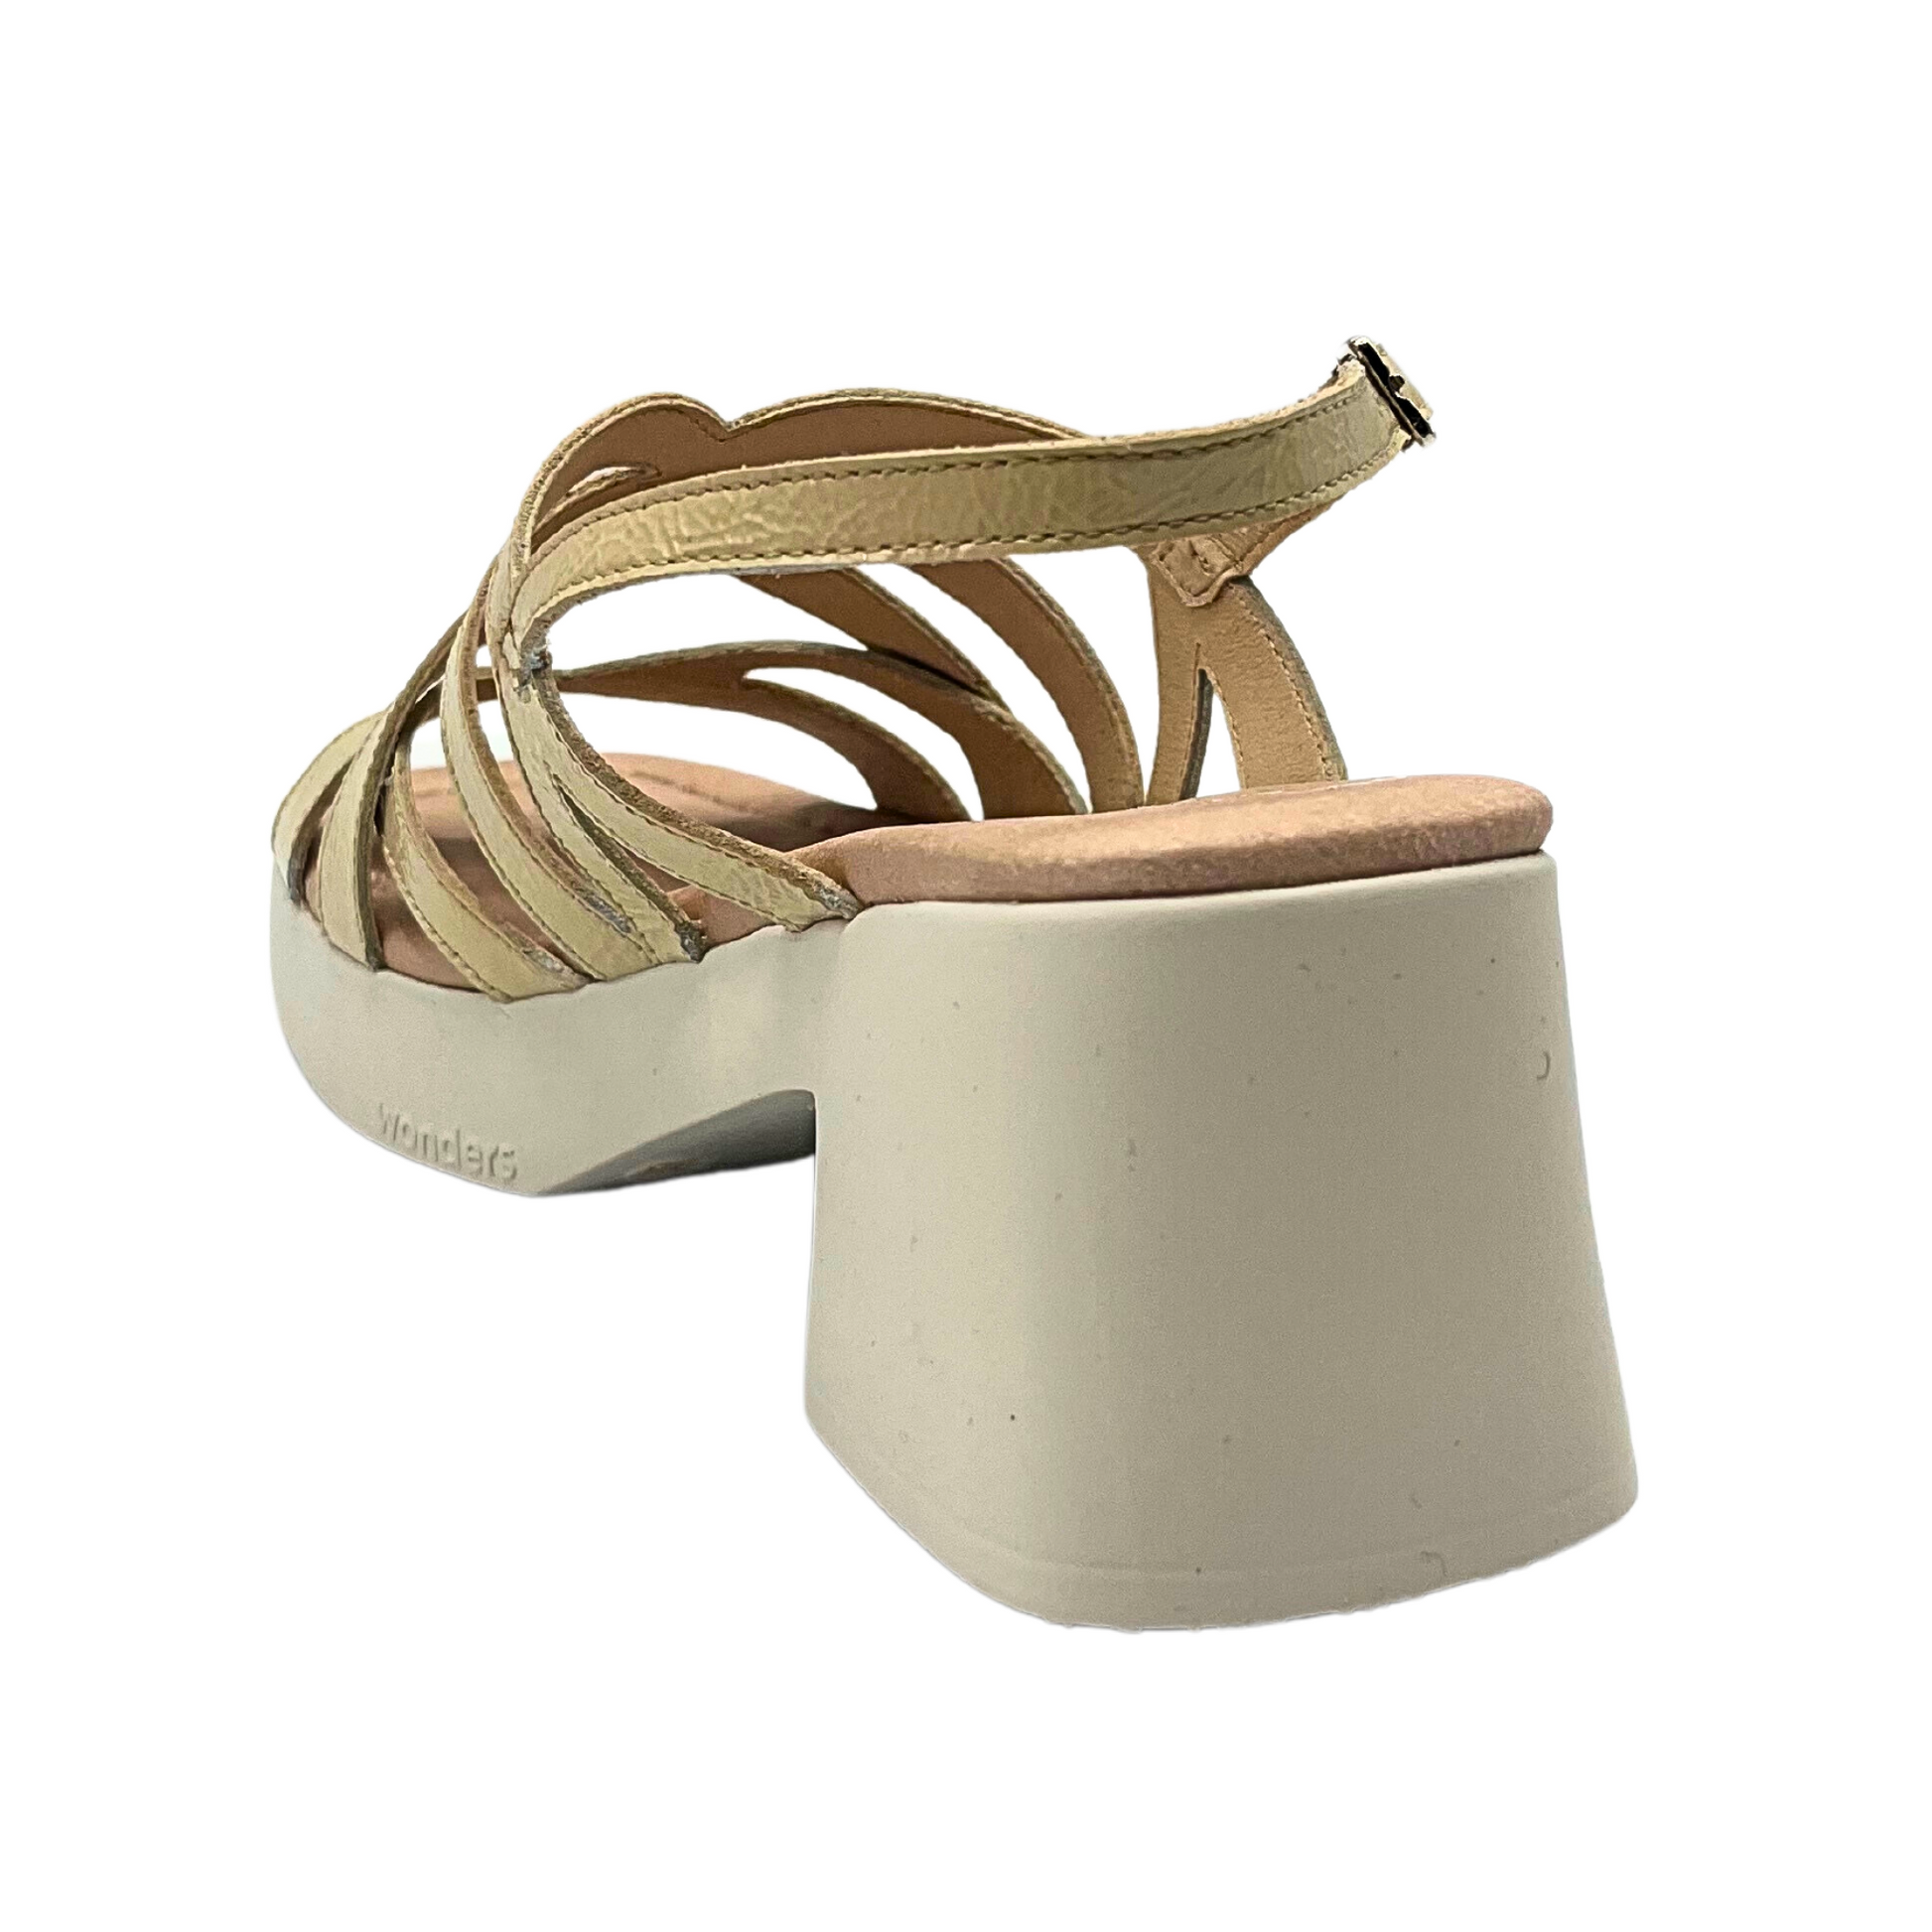 Angled rear view of a strappy sandal with chunky rubber sole